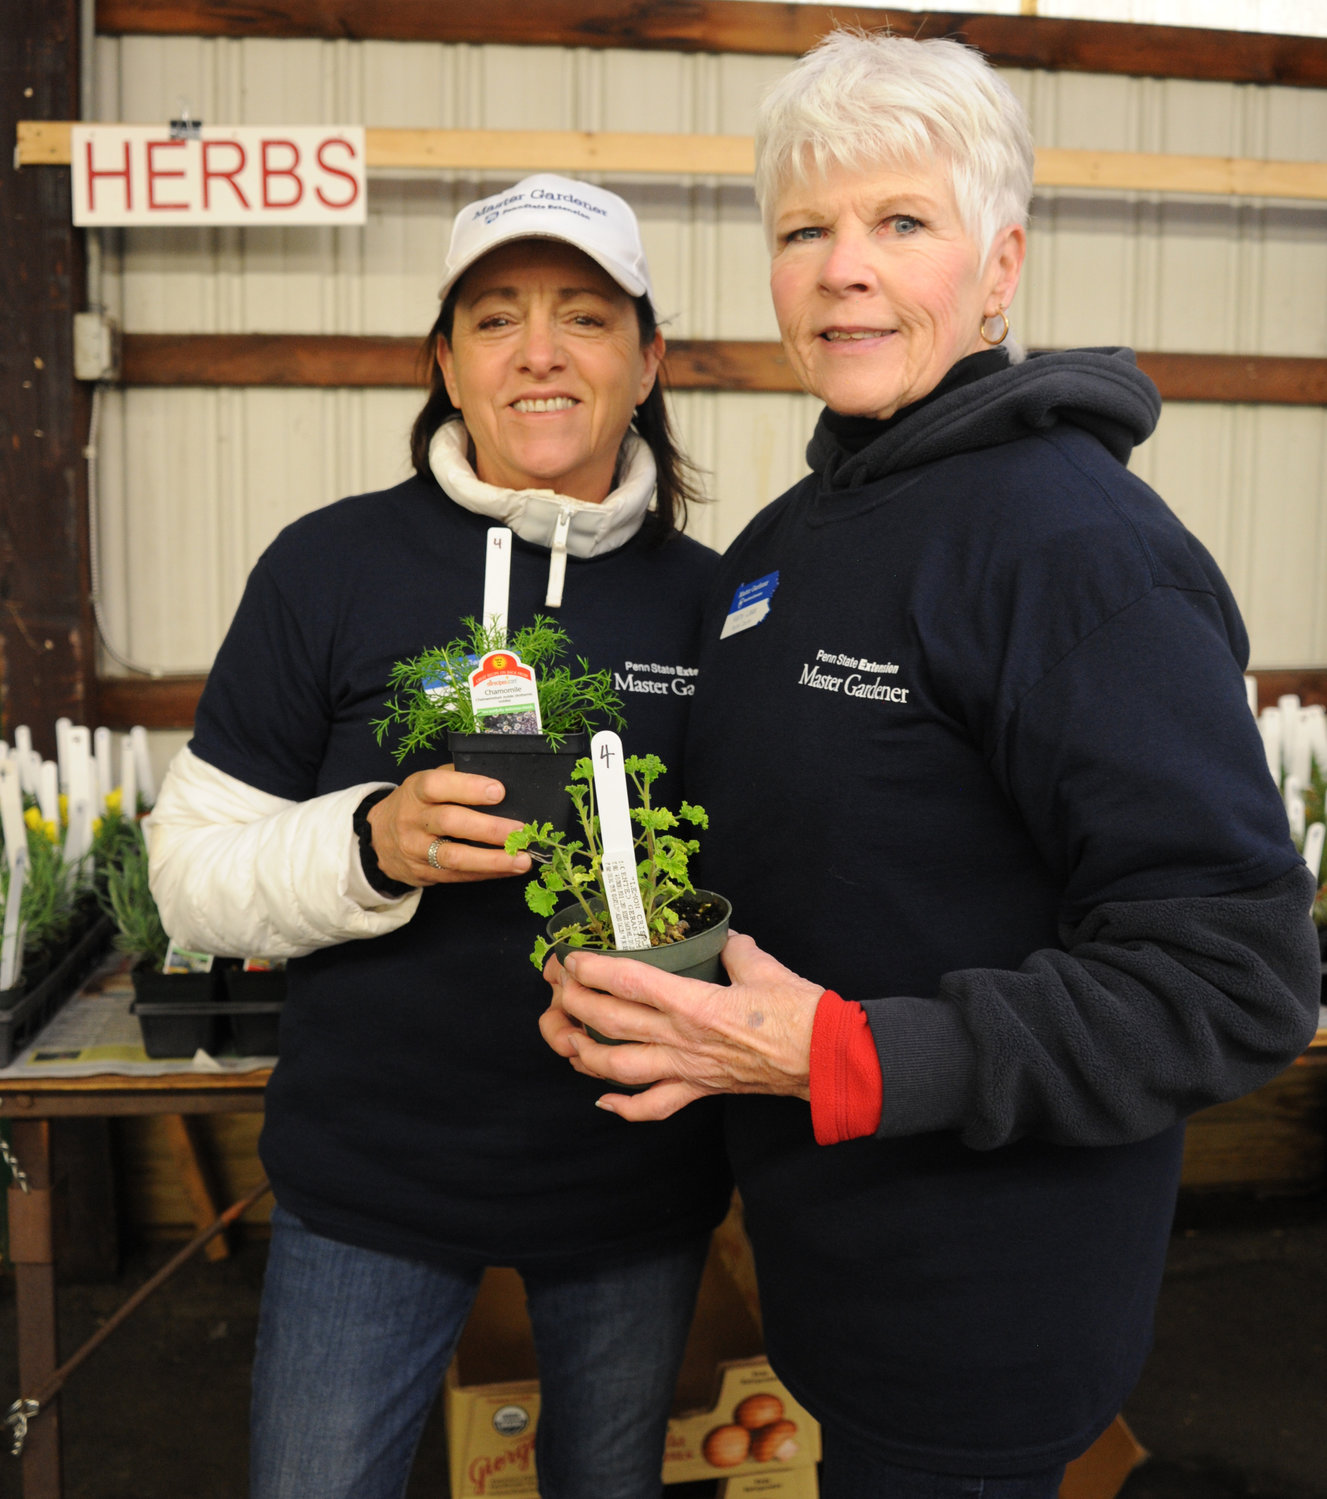 Kathy Lees and Donna Collins man the herb booth.